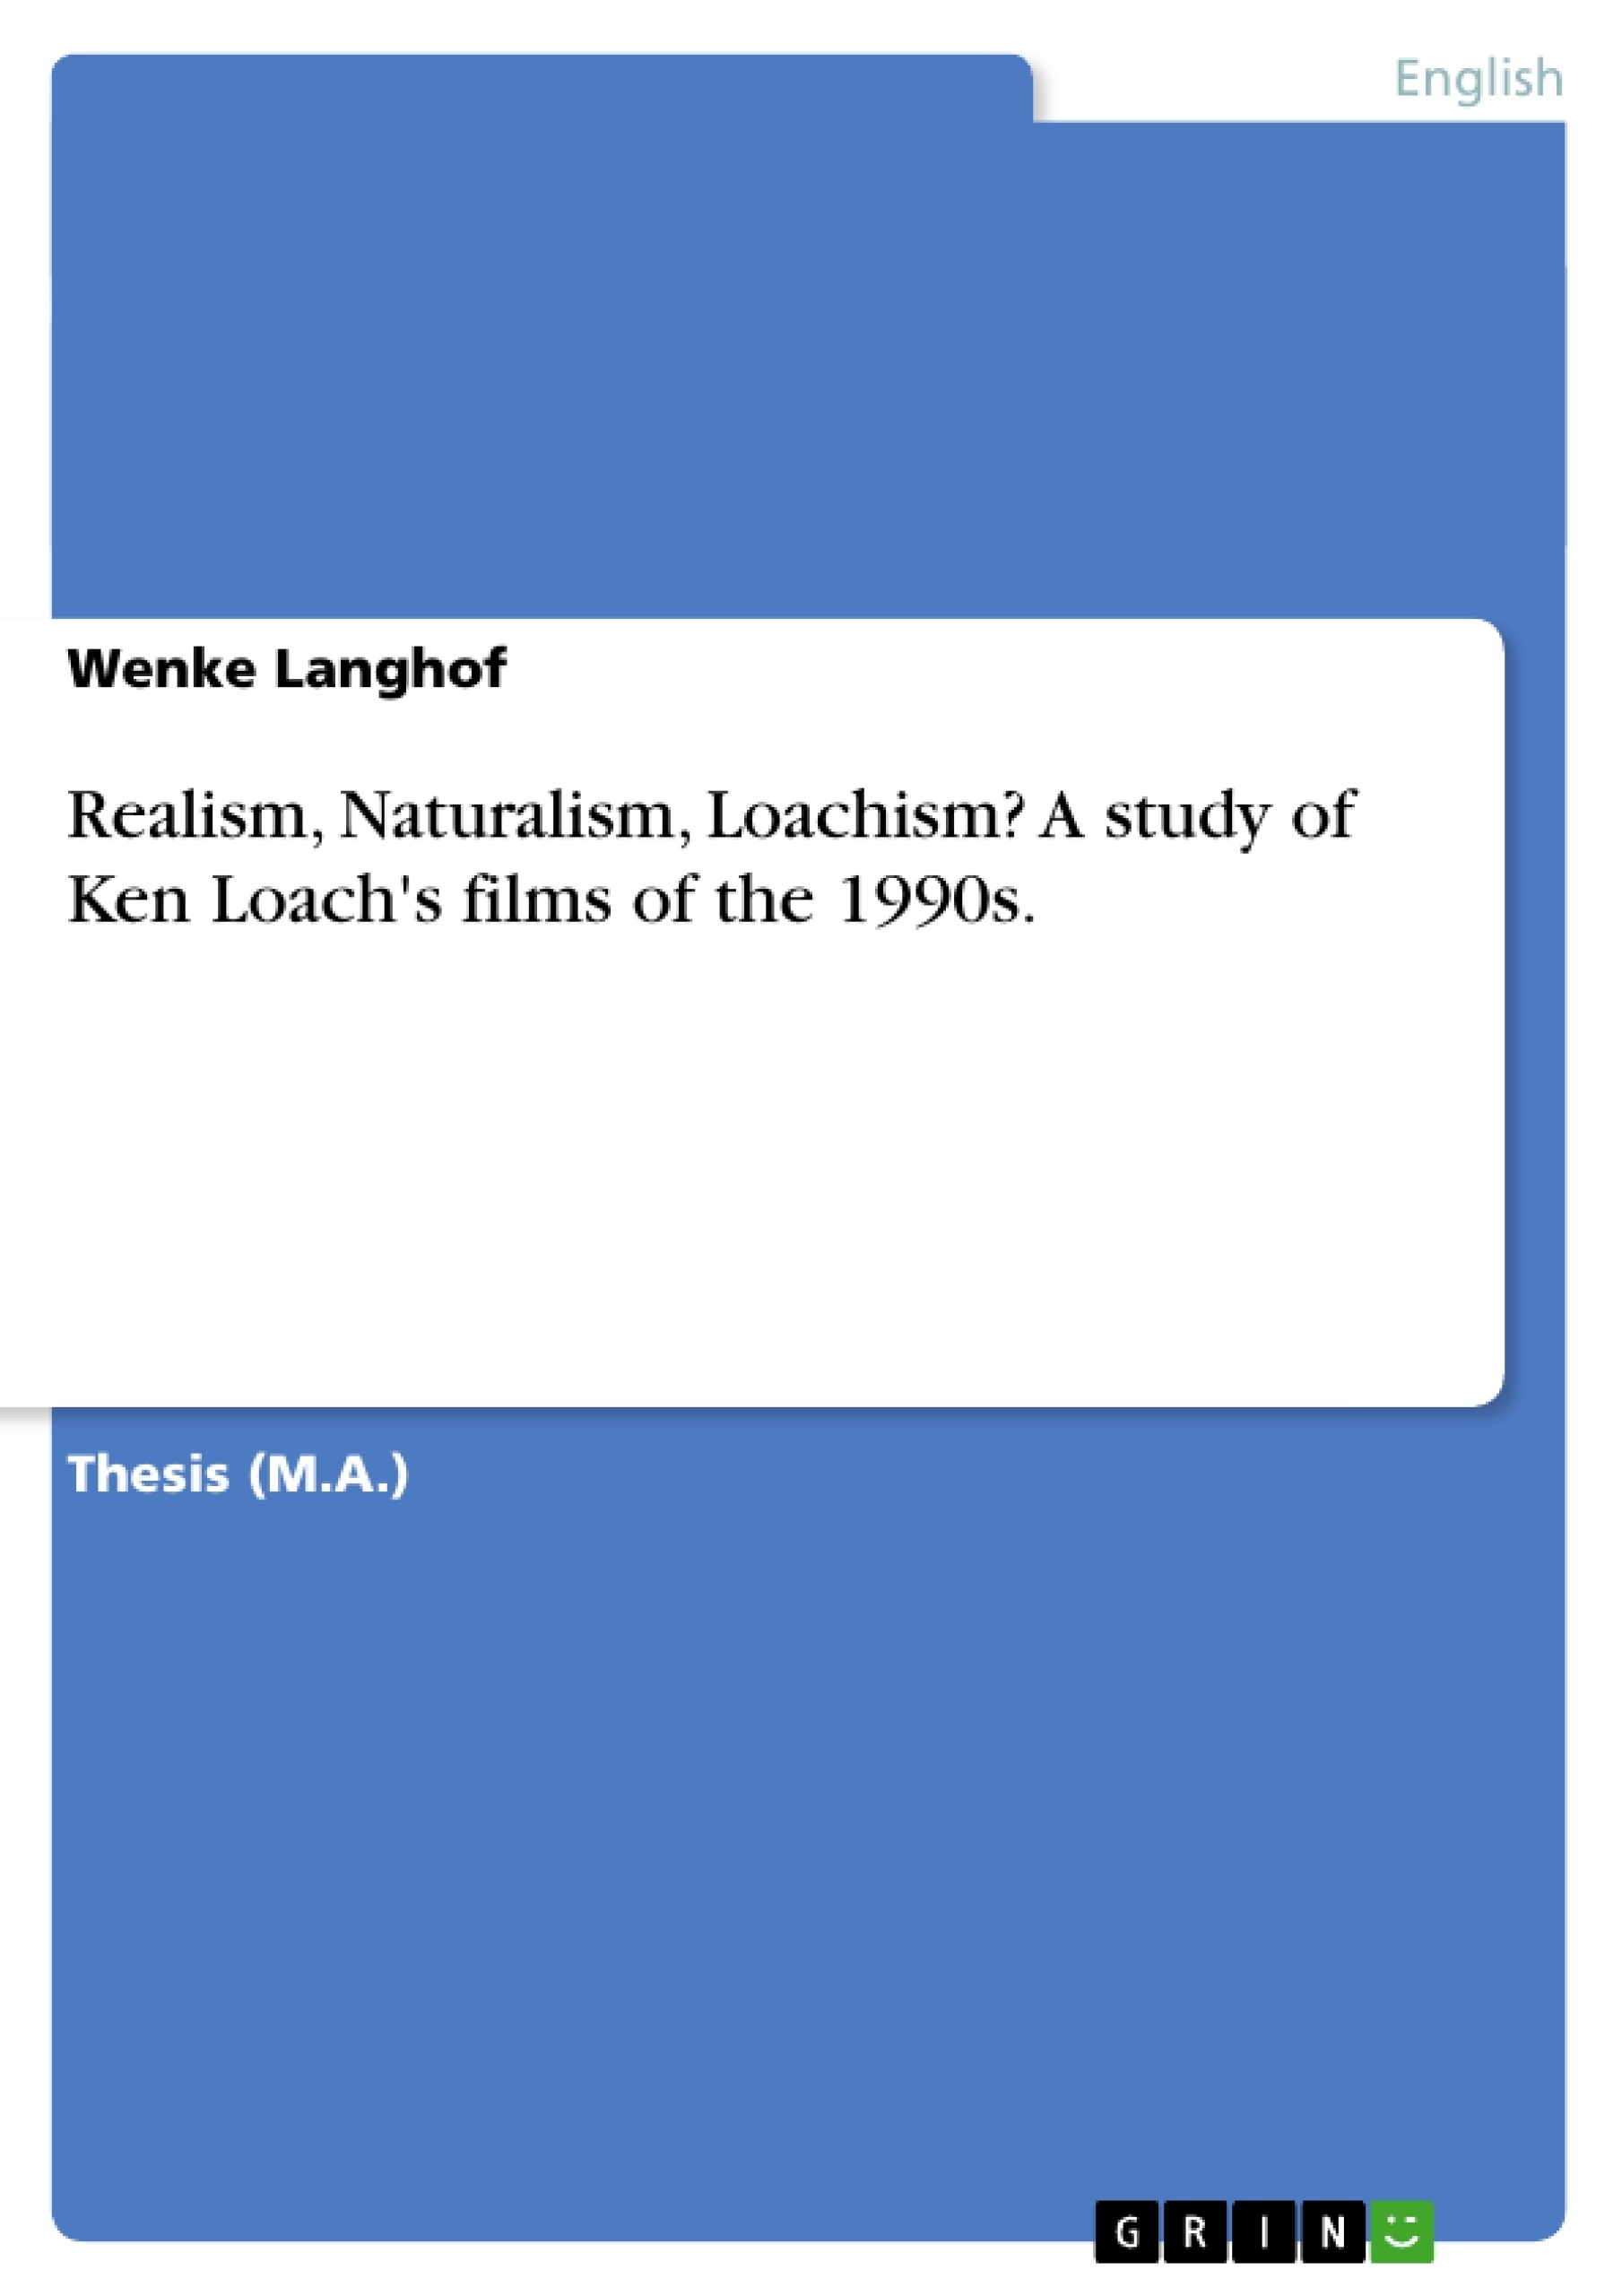 Título: Realism, Naturalism, Loachism? A study of Ken Loach's films of the 1990s.